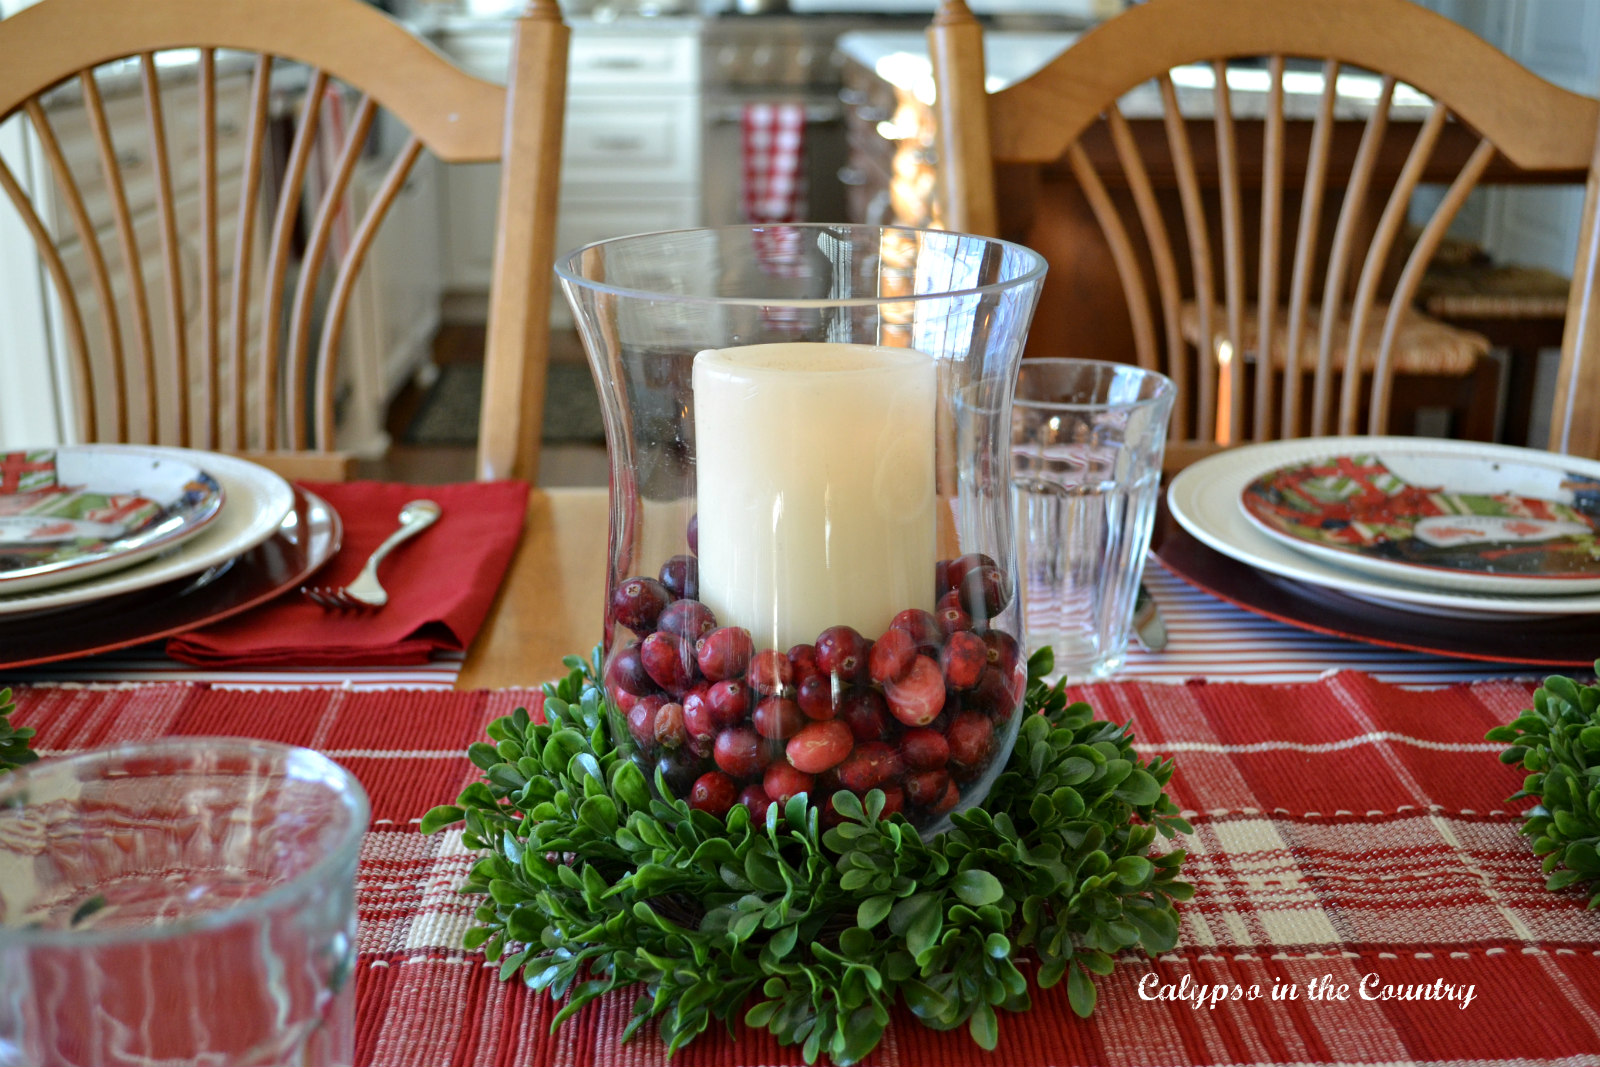 Colorful and Festive Christmas Table